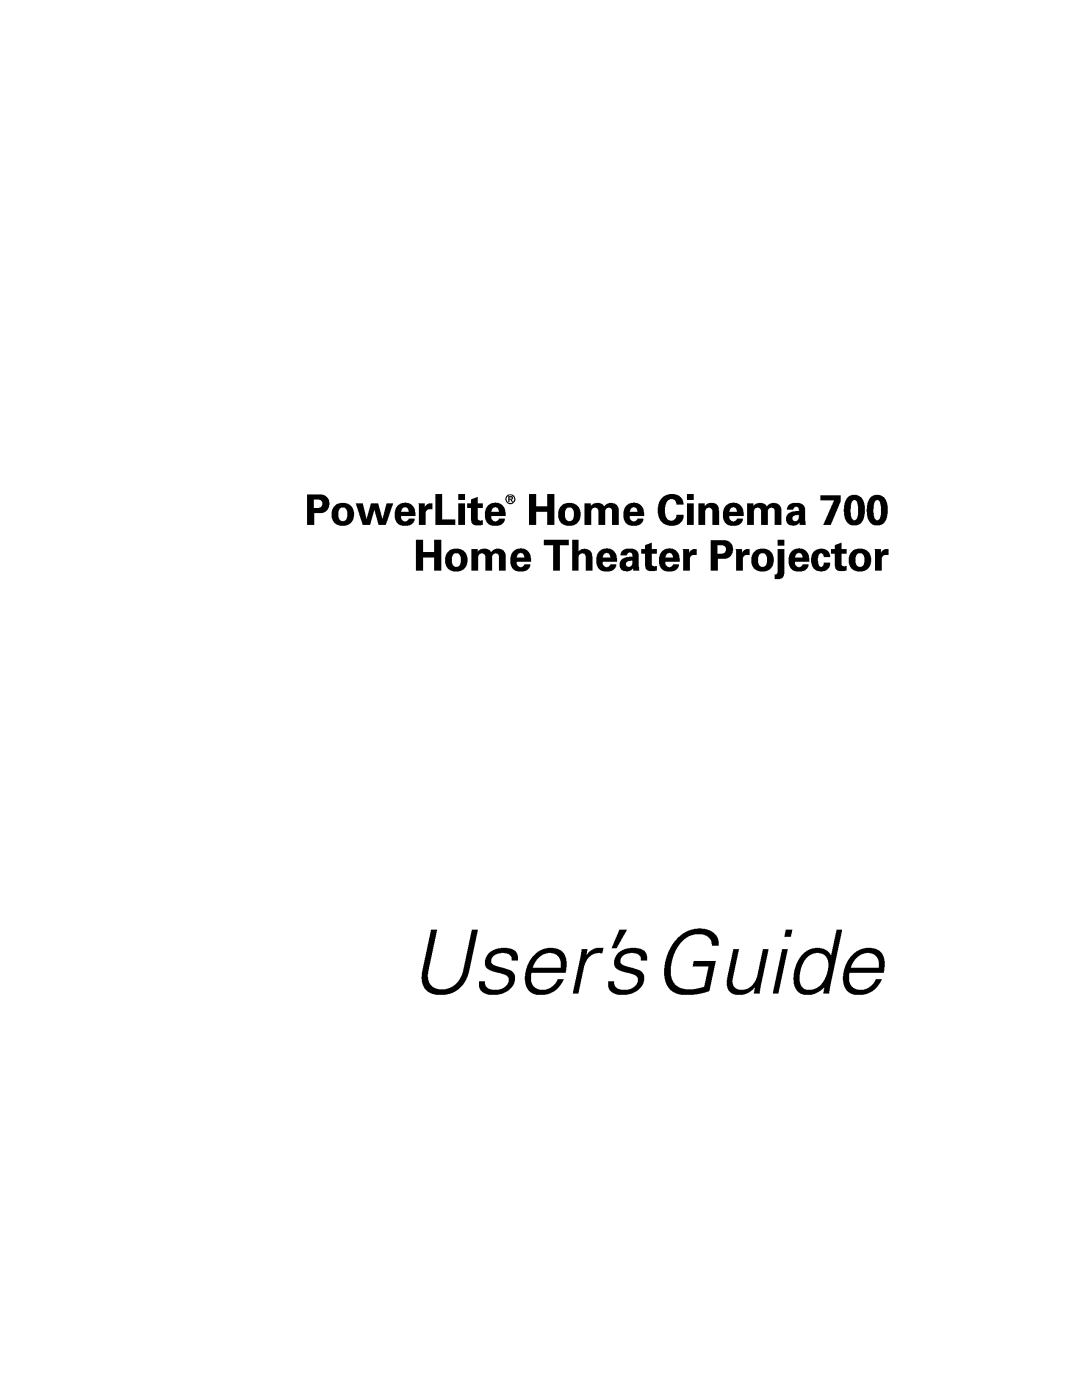 Univex 700 manual User’s Guide, PowerLite Home Cinema Home Theater Projector 